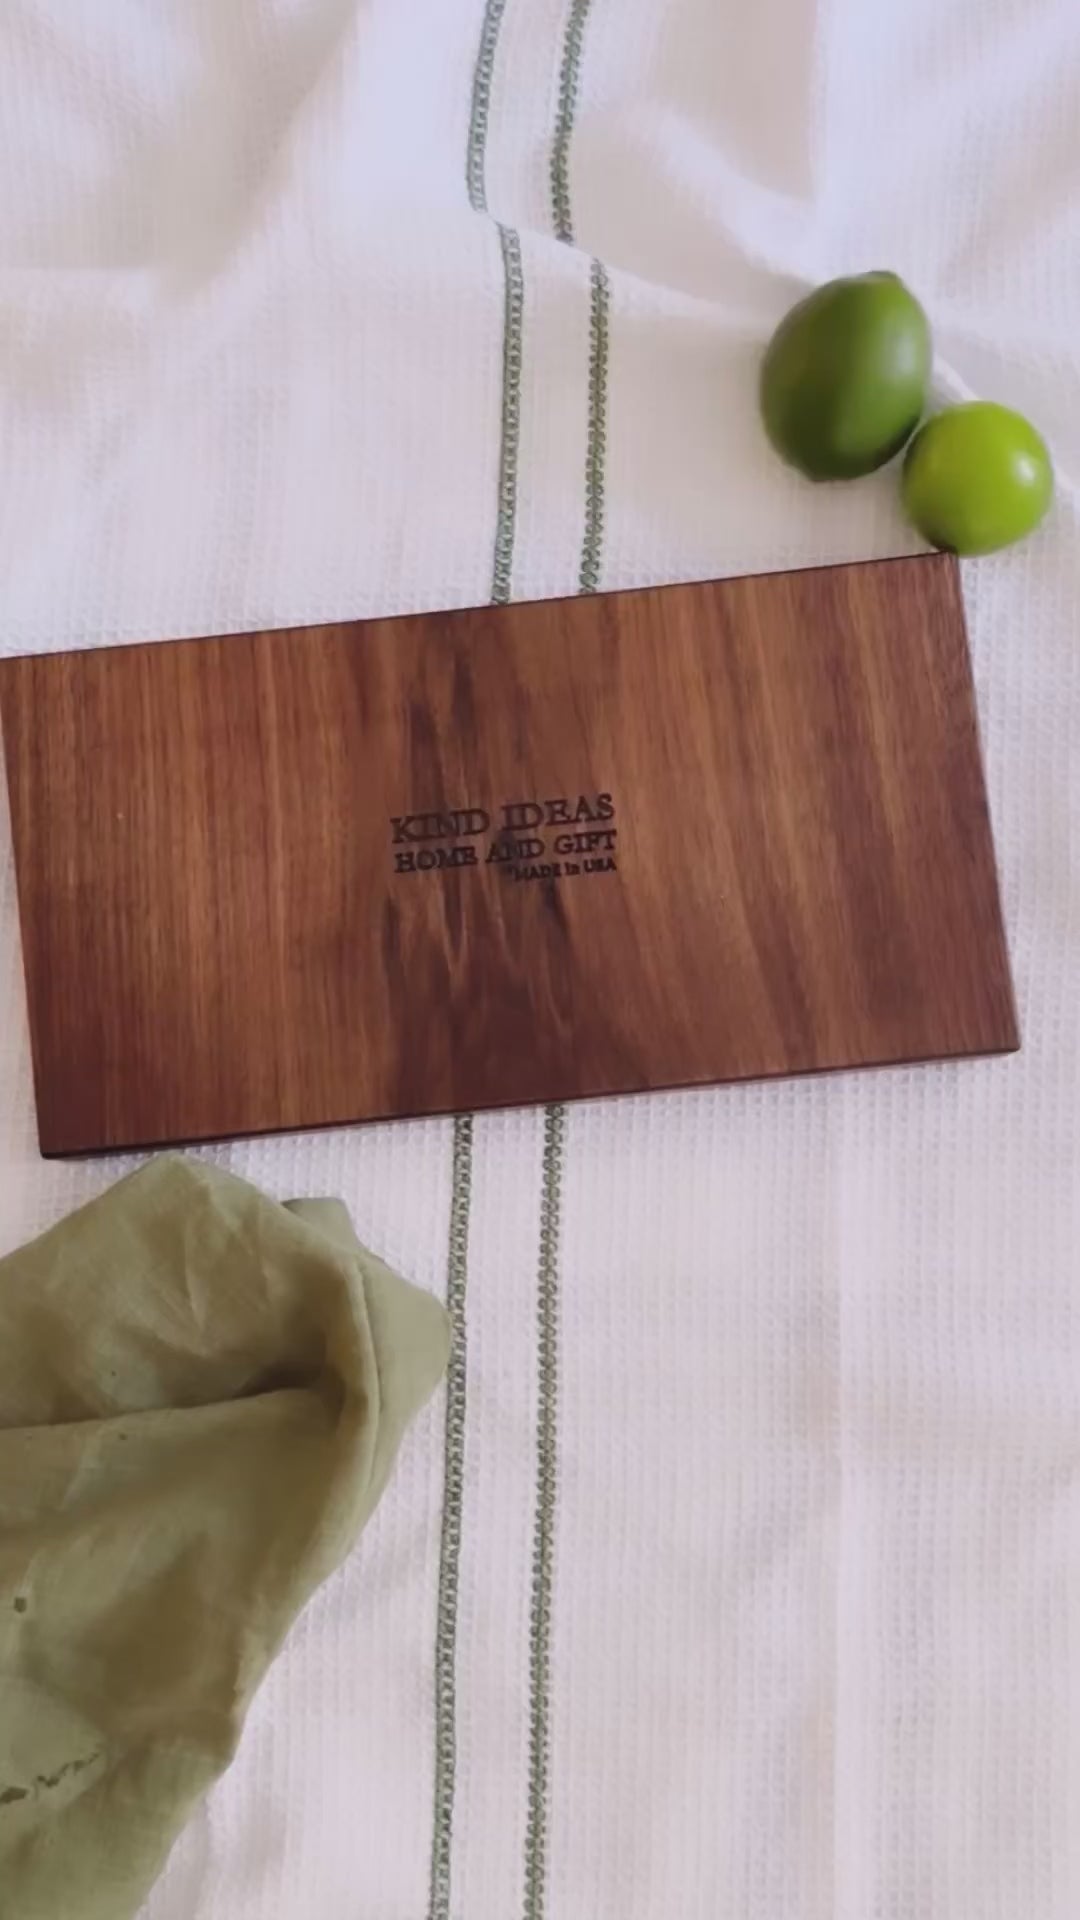 video of limes being cut on a mini cutting board, then the board is flipped and the other side is a tequila flight board